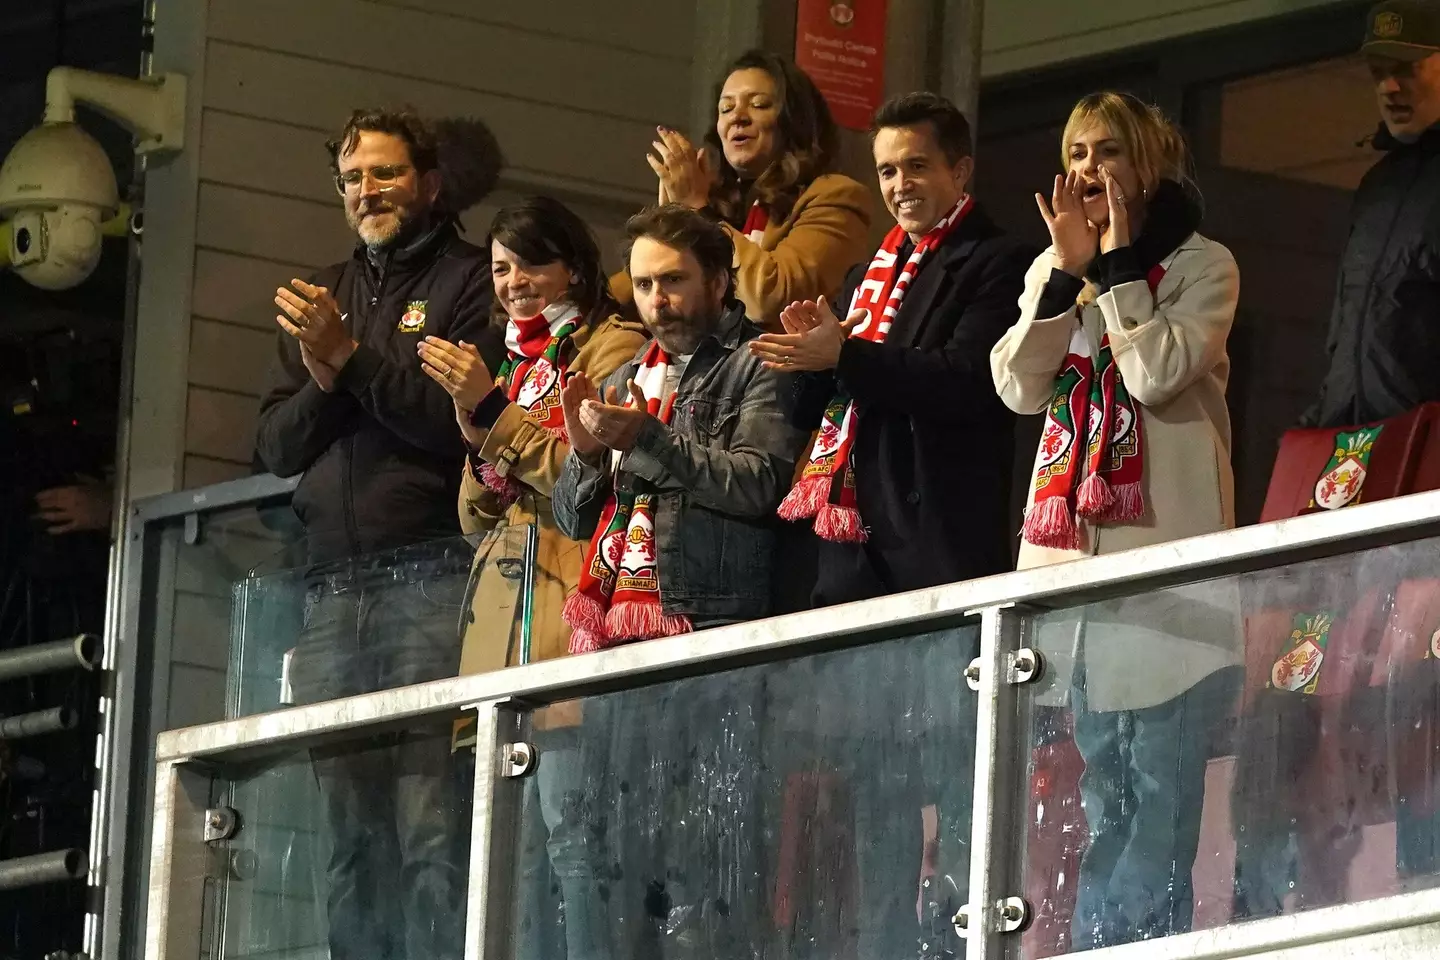 Charlie Day at a Wrexham match with Rob McElhenney.